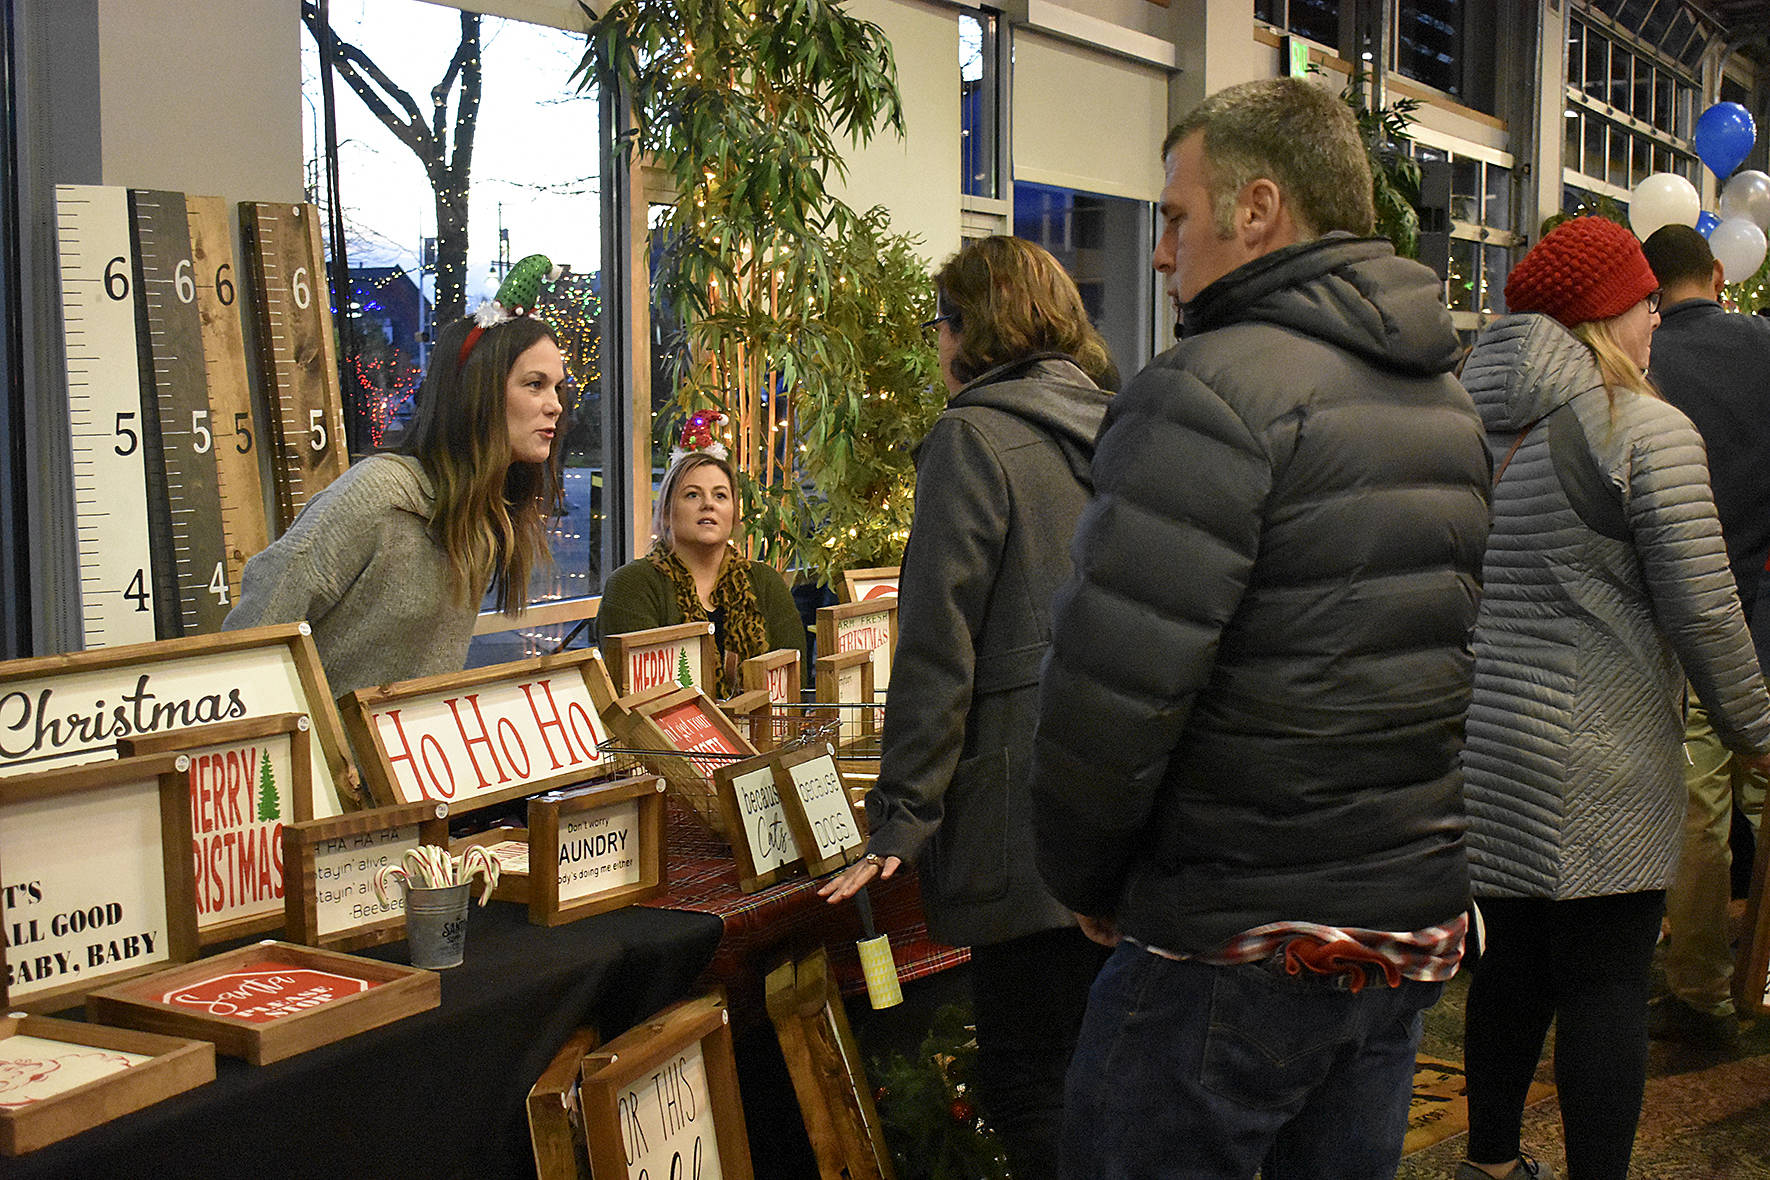 Photo by Haley Ausbun. A booth at the pop-up market at the downtown tree lighting. Saturday, Nov. 30 at the Renton Pavilion Events Center.